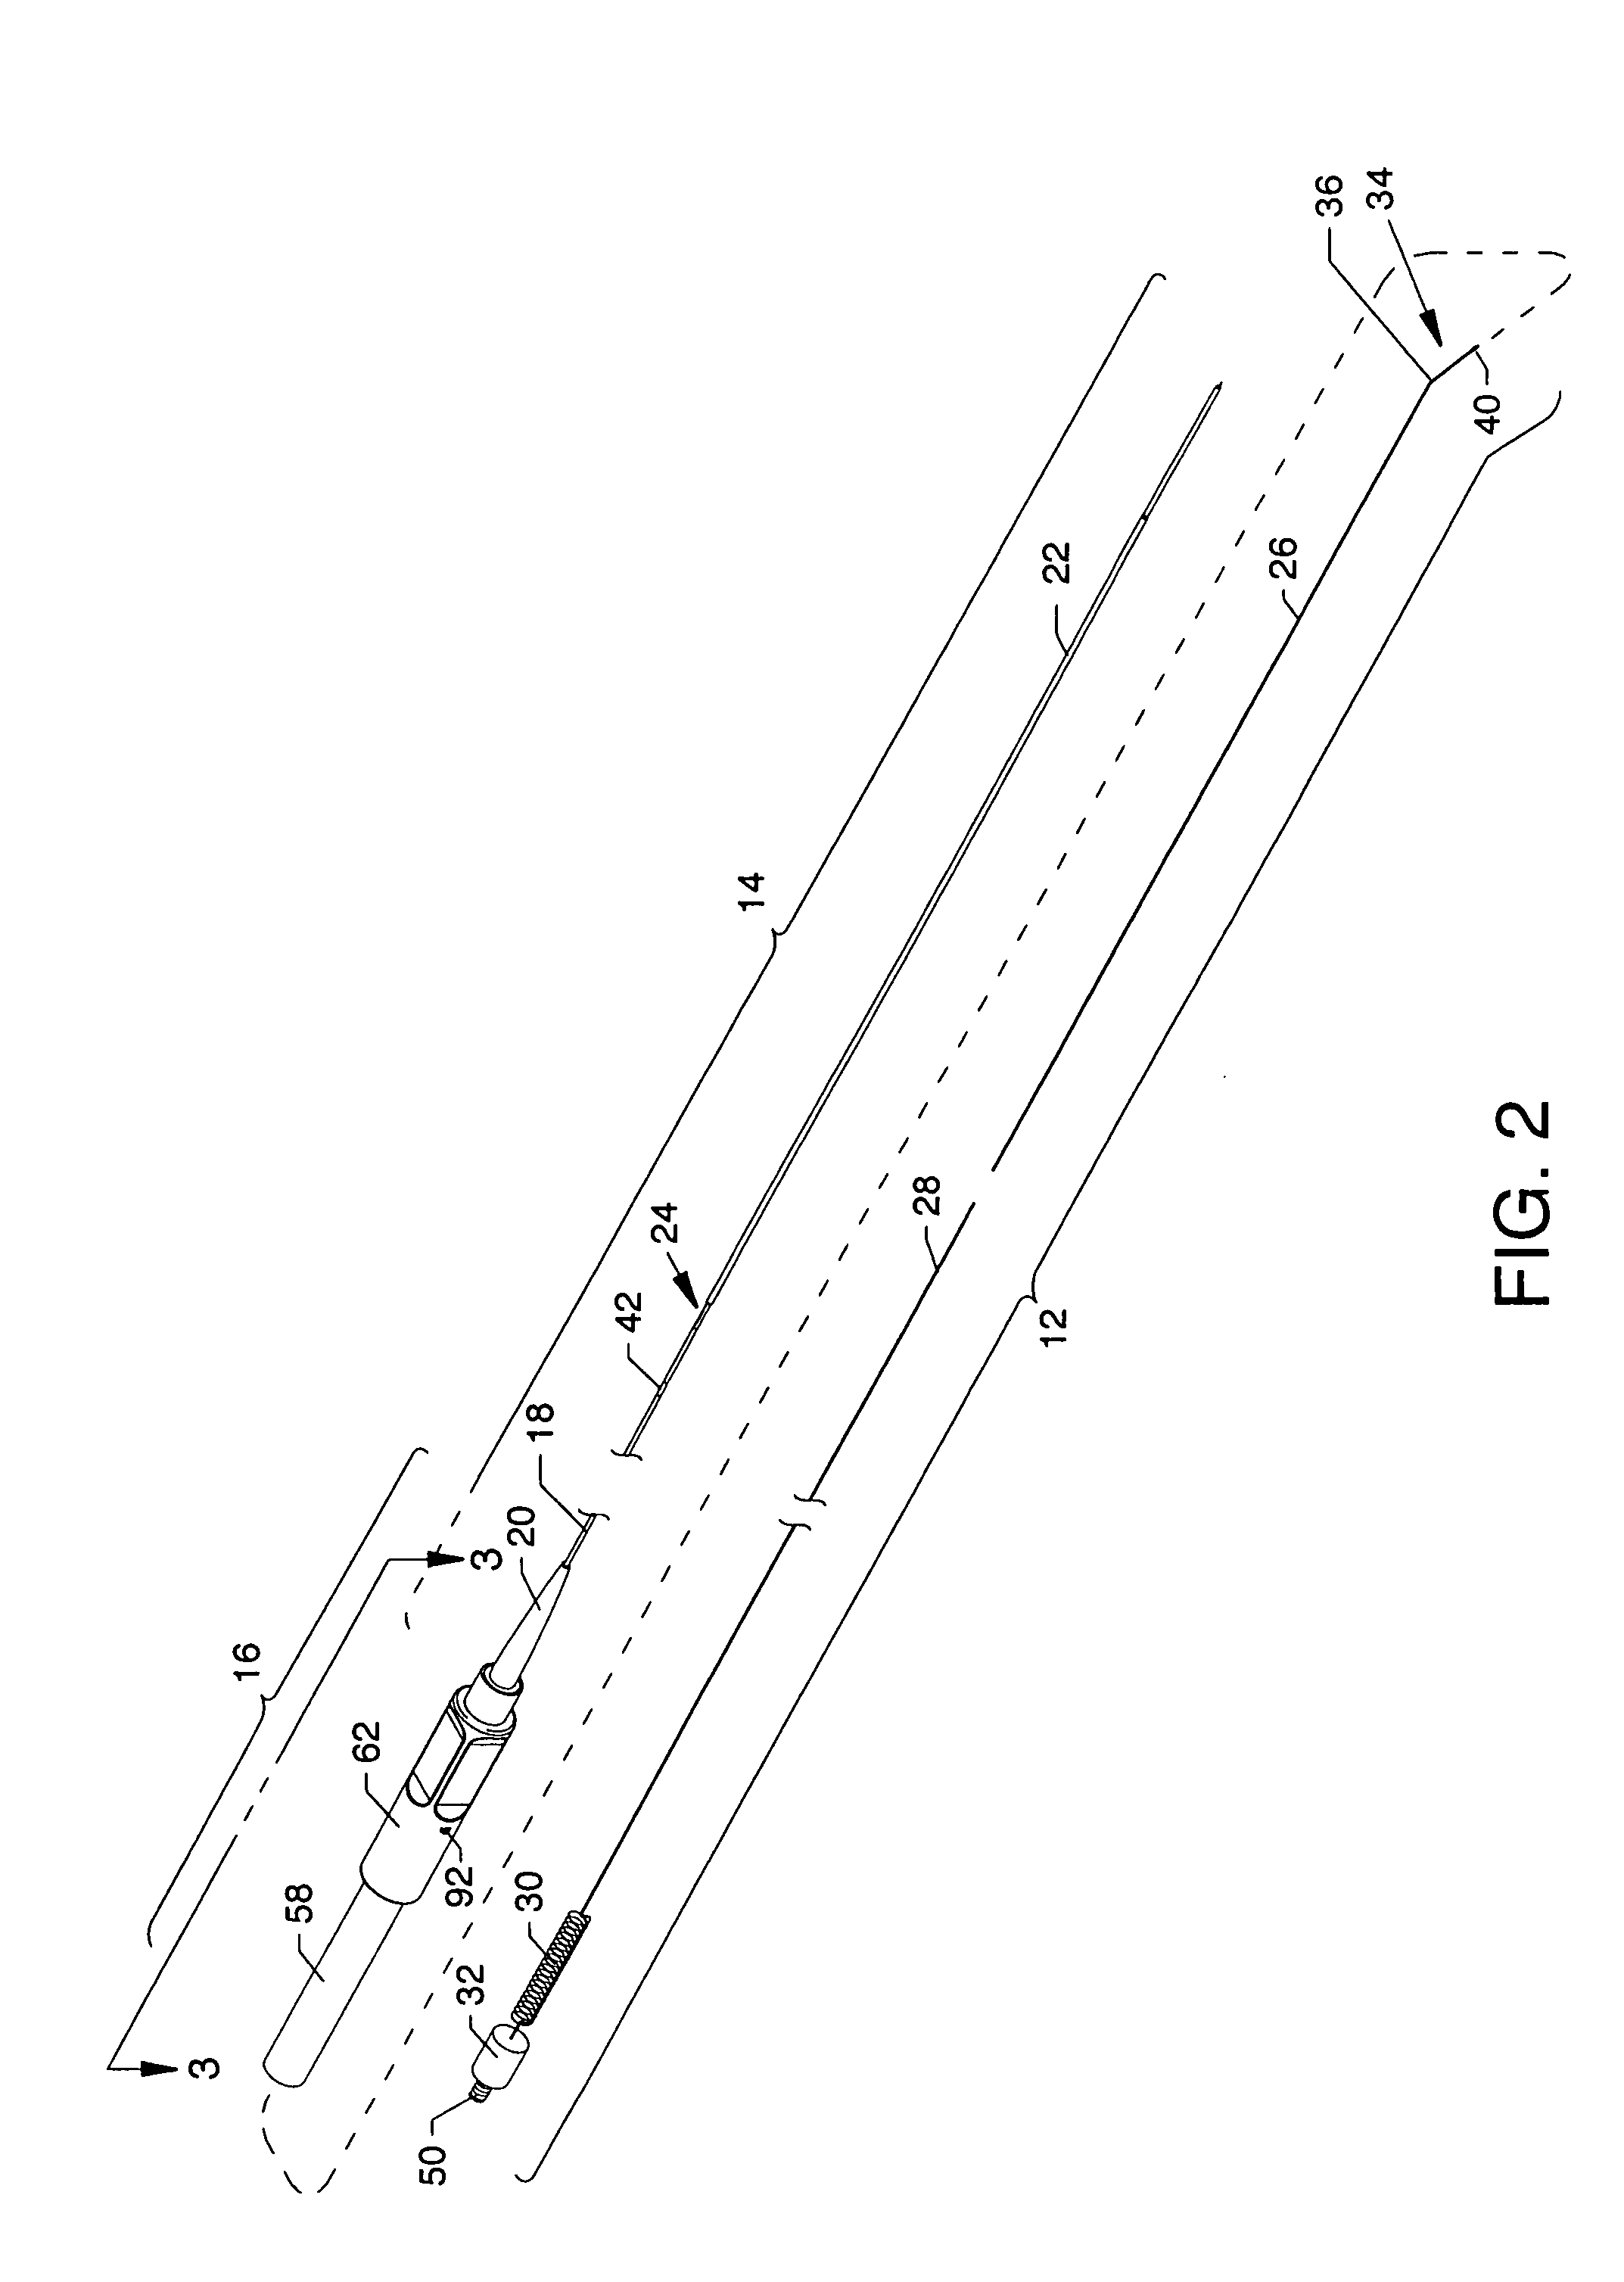 Forwardly directable fluid jet crossing catheter